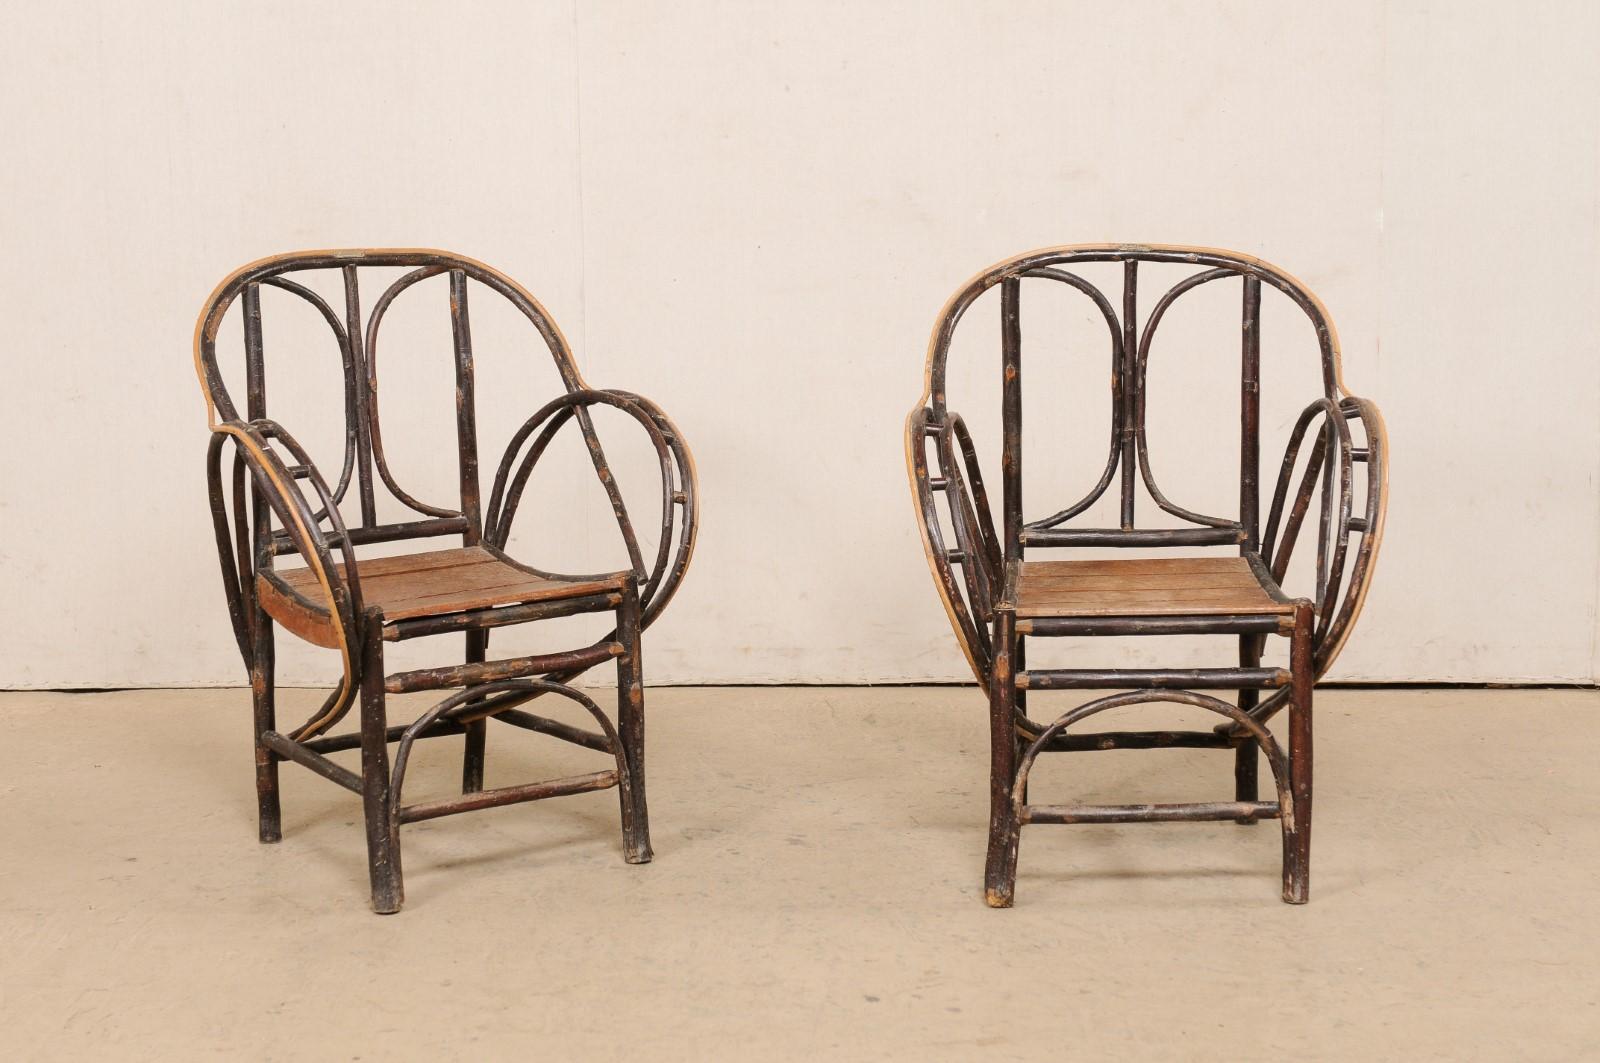 A Spanish set of six curvy bent-wood café chairs. This vintage set of dining chairs have come to us from Spain and were once the café chairs, as their metal labels on top-rail backs indicate, from 